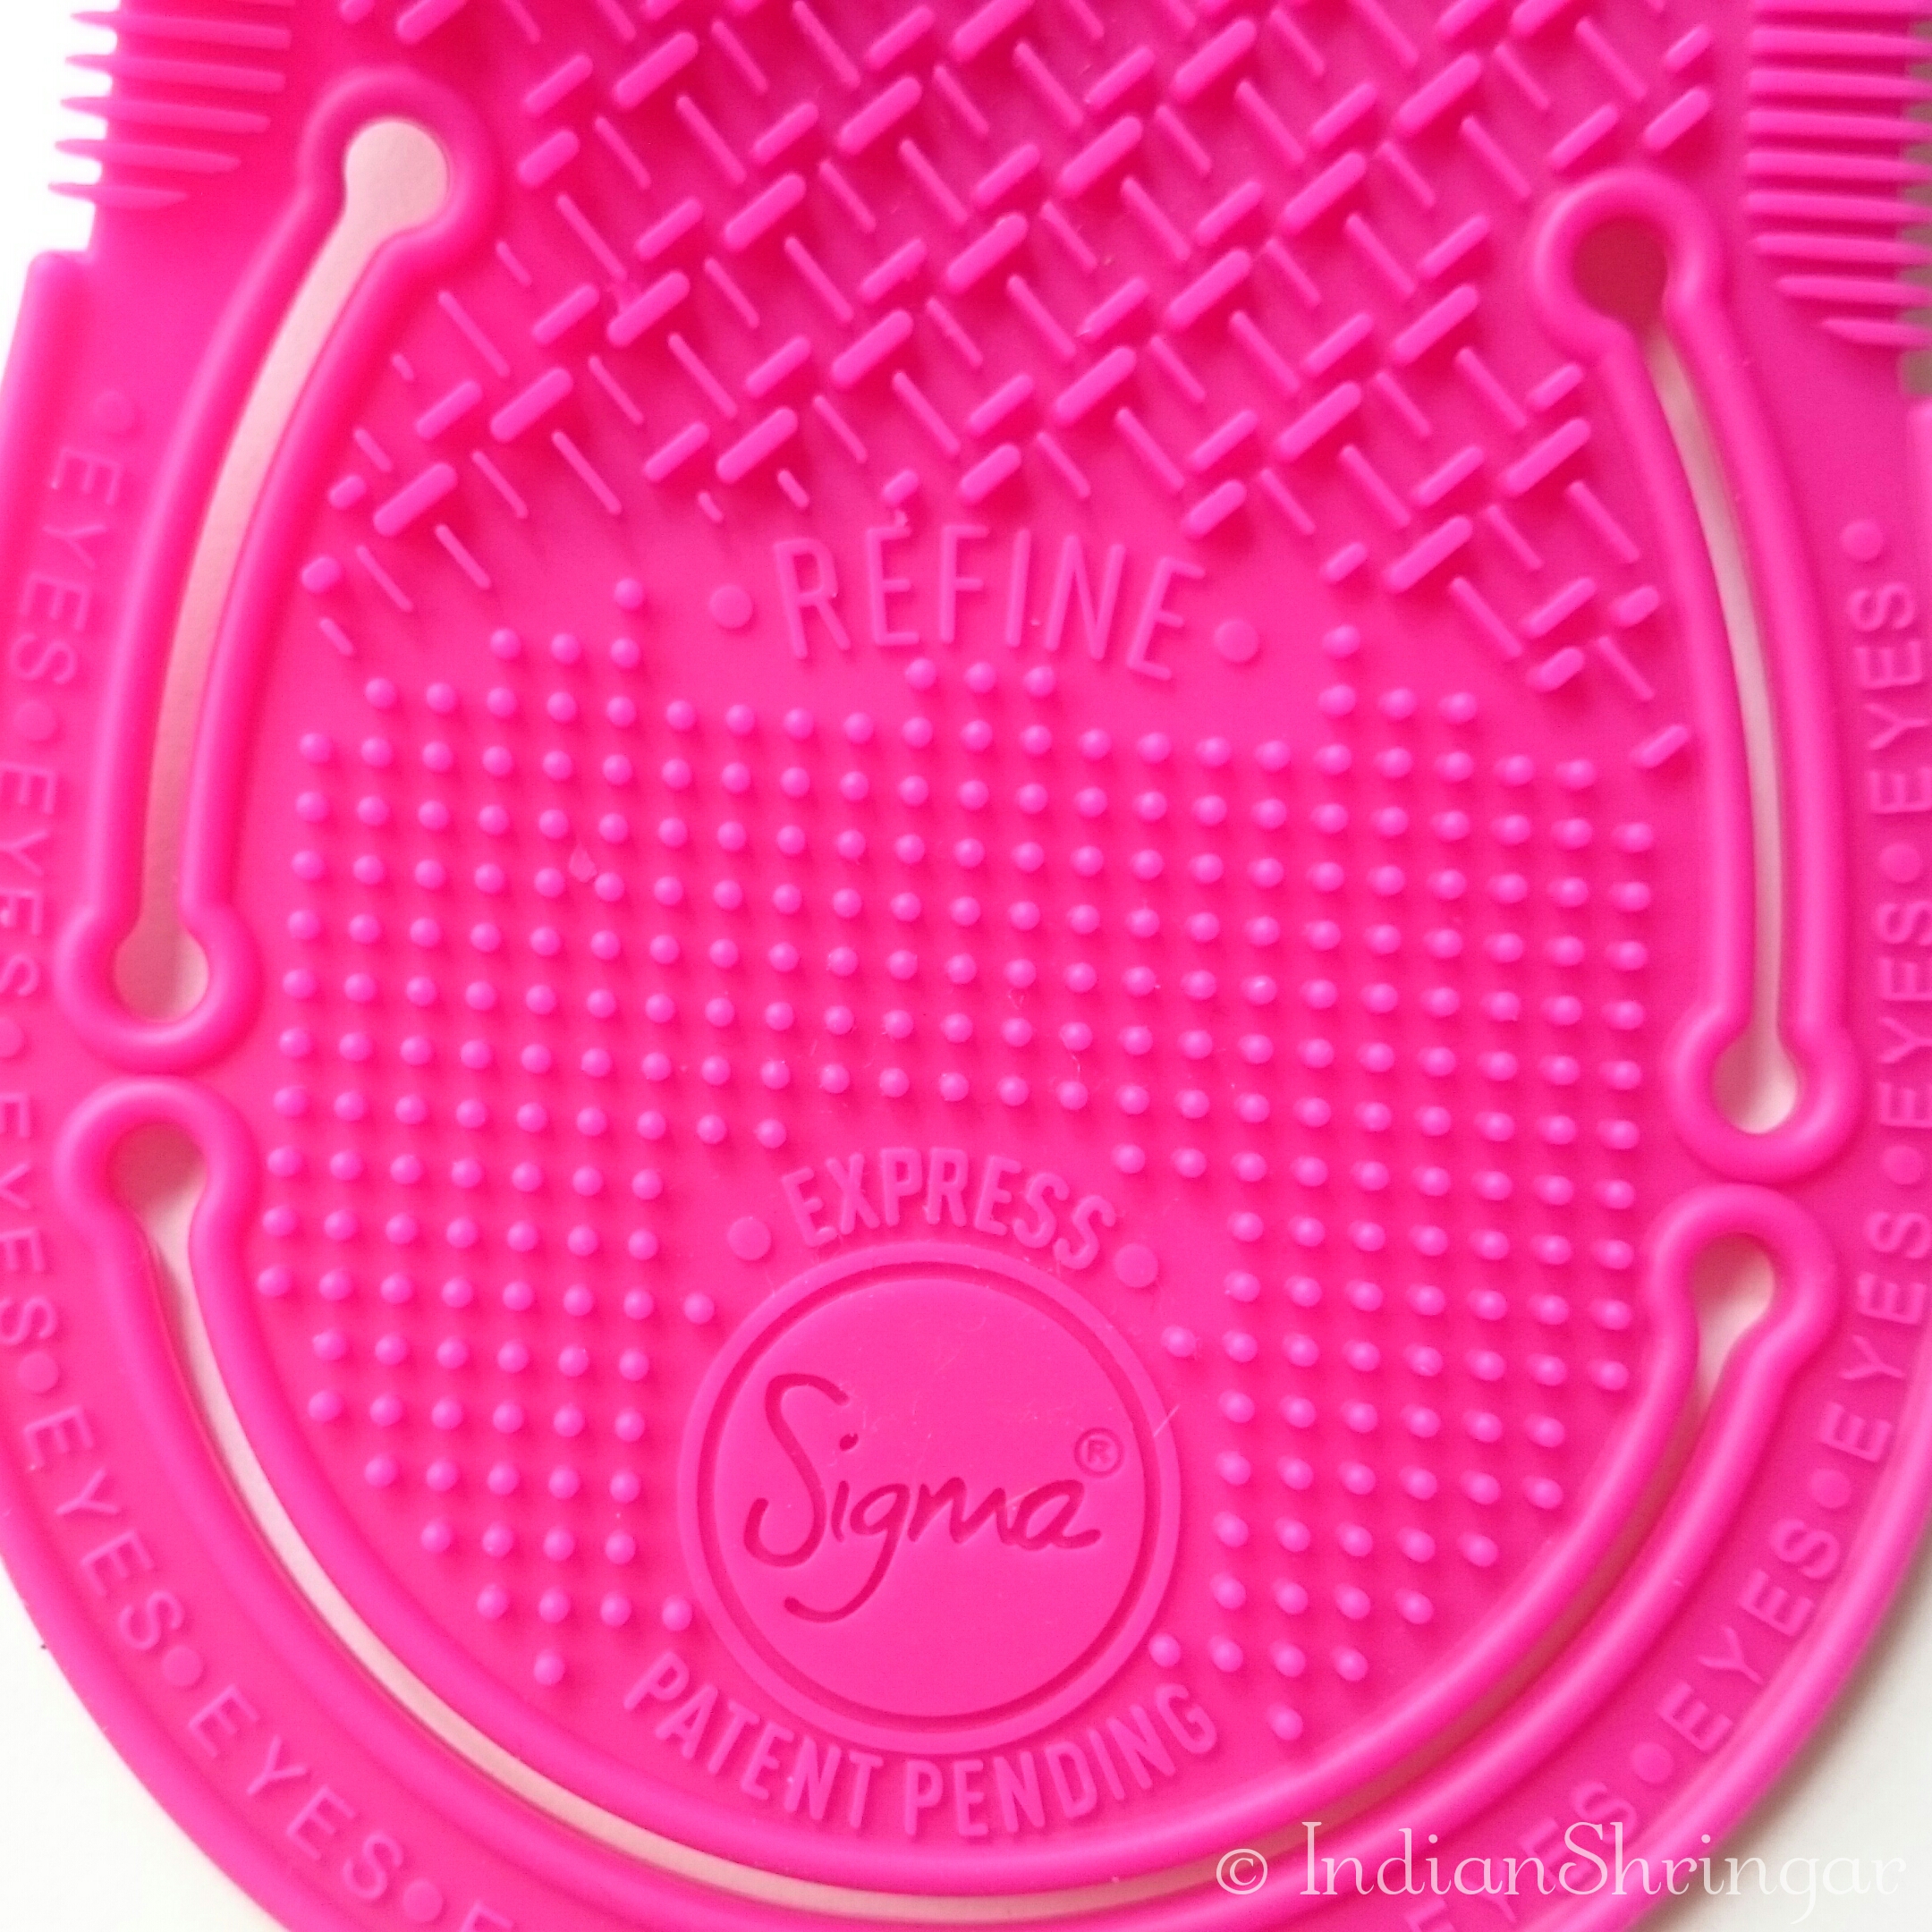 Sigma Spa Express Brush Cleaning Glove Review